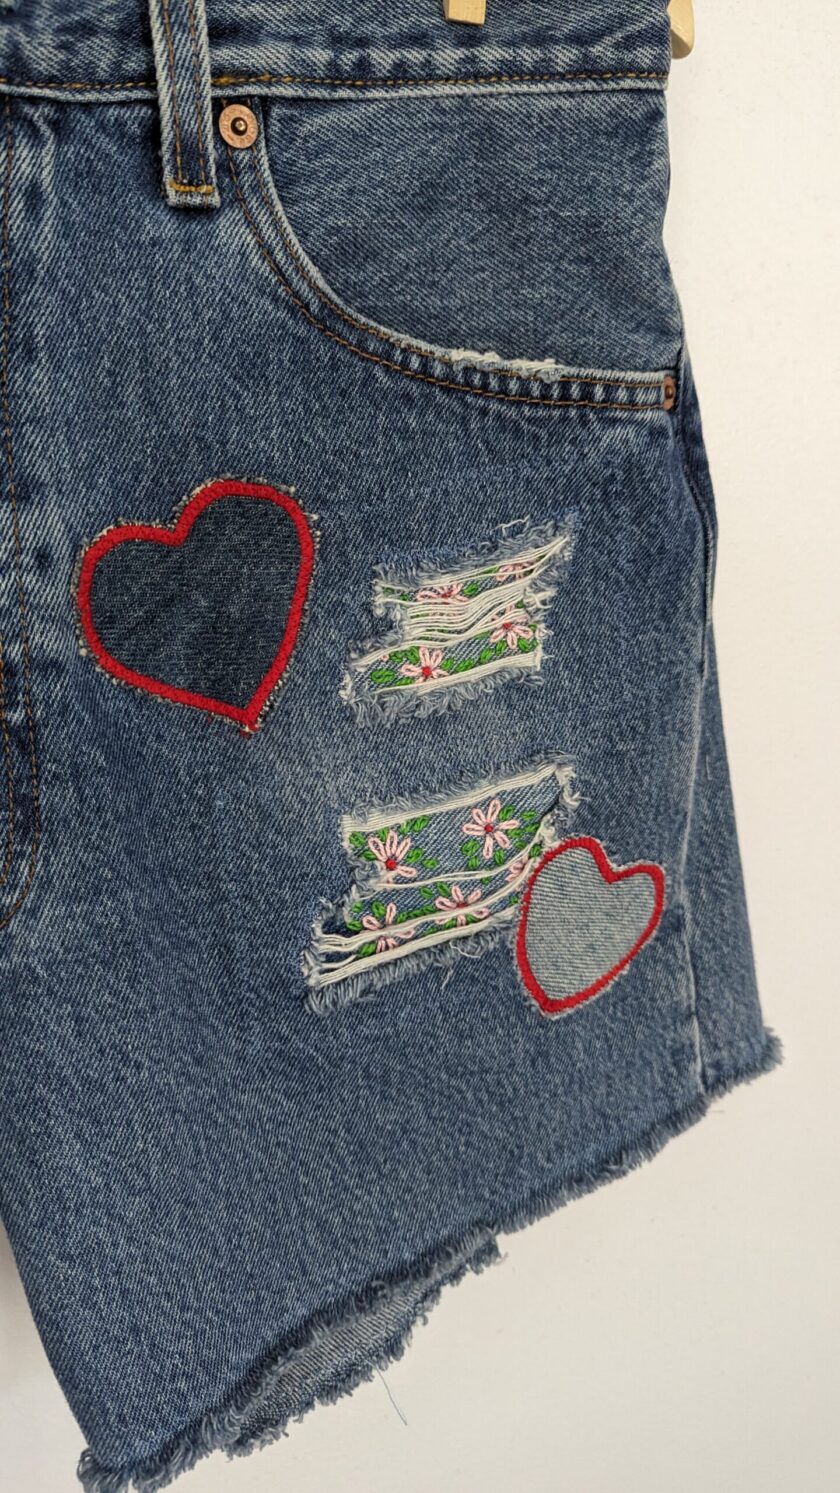 a pair of denim shorts with hearts on them.